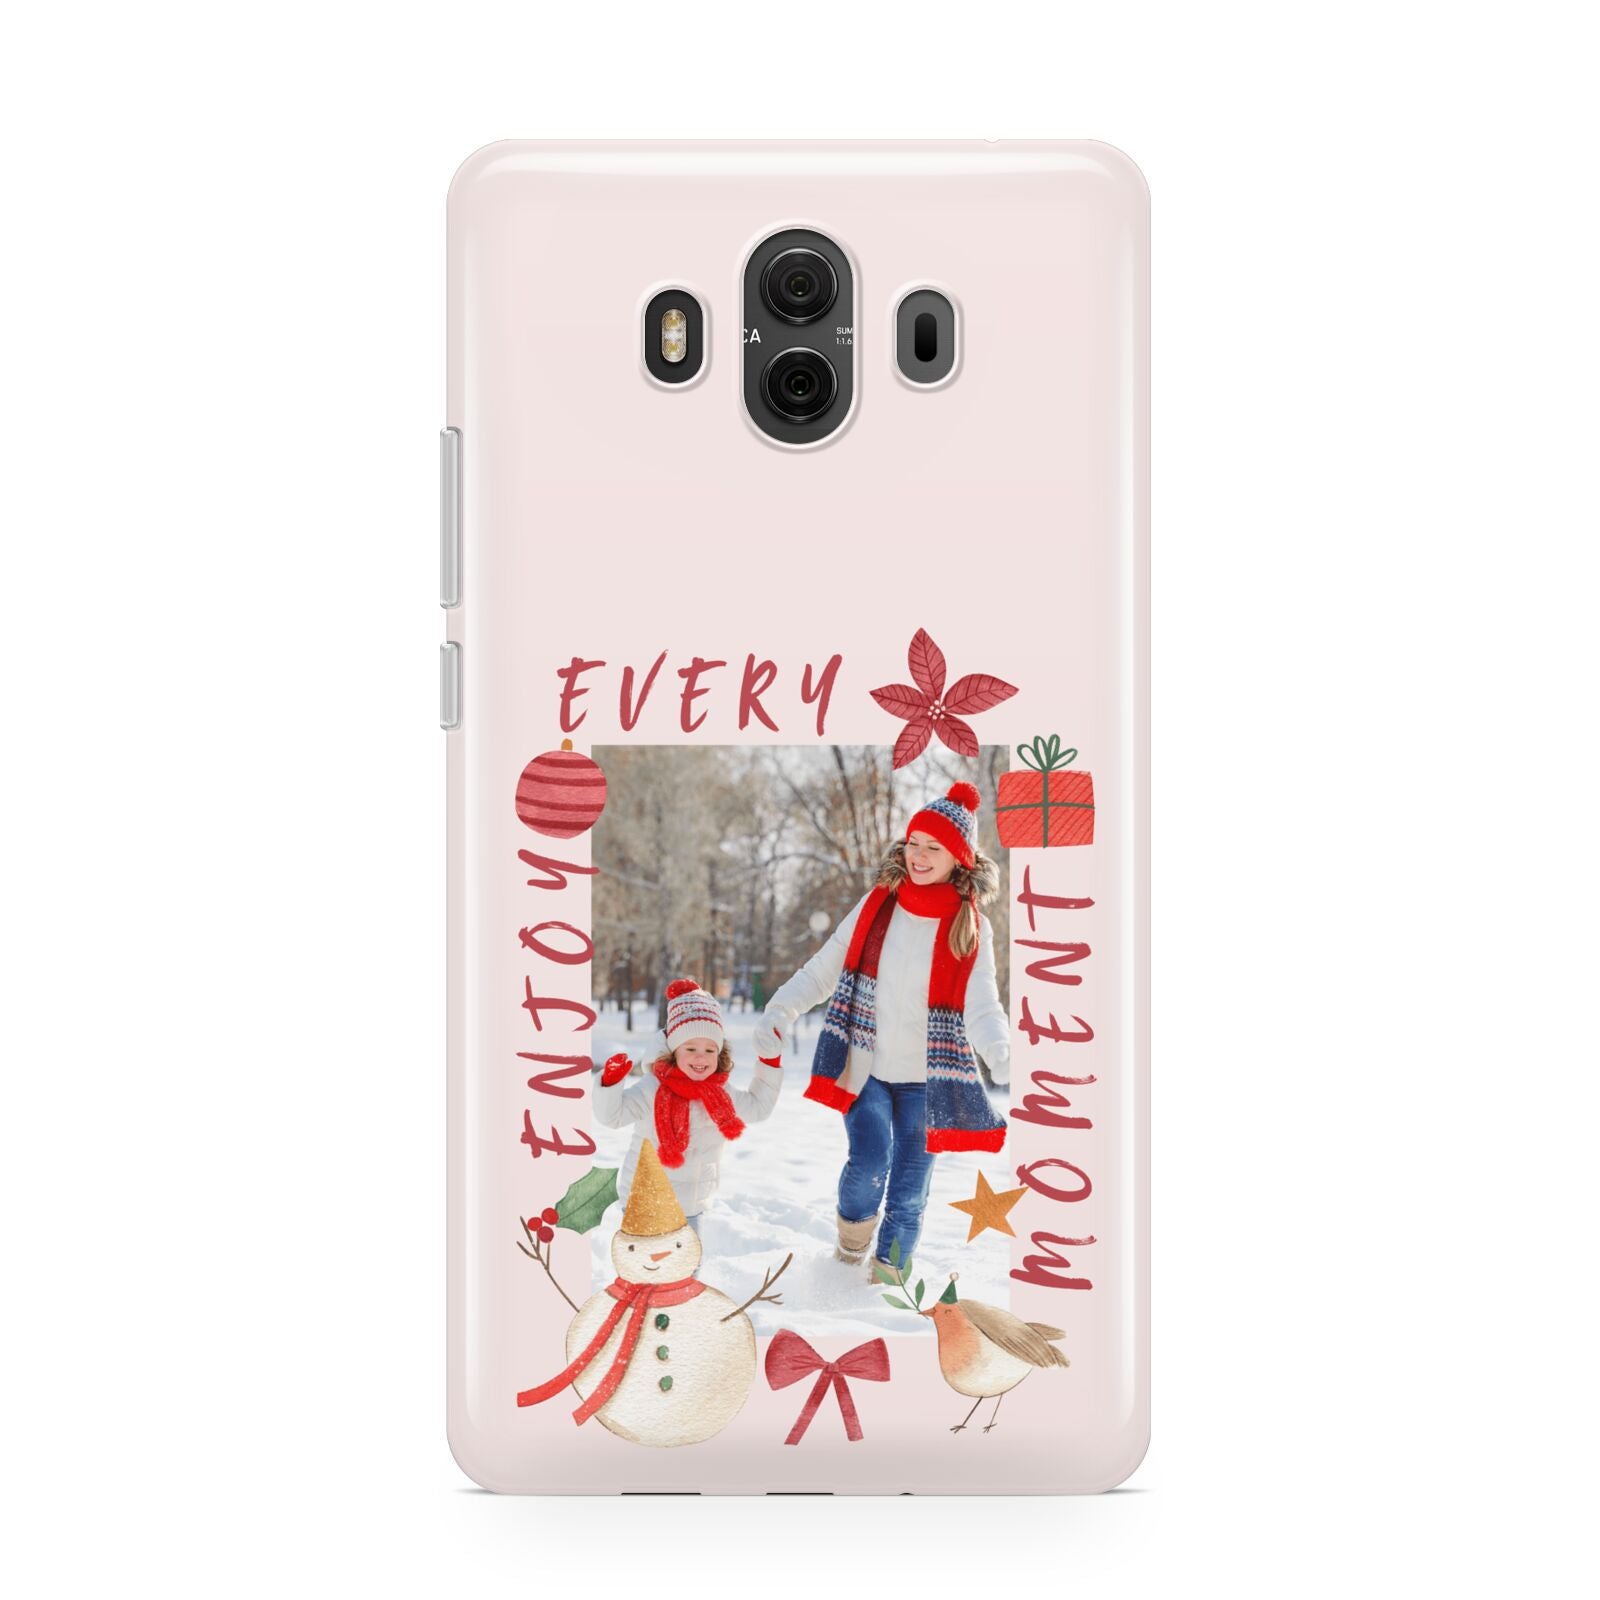 Personalised Christmas Moments Huawei Mate 10 Protective Phone Case